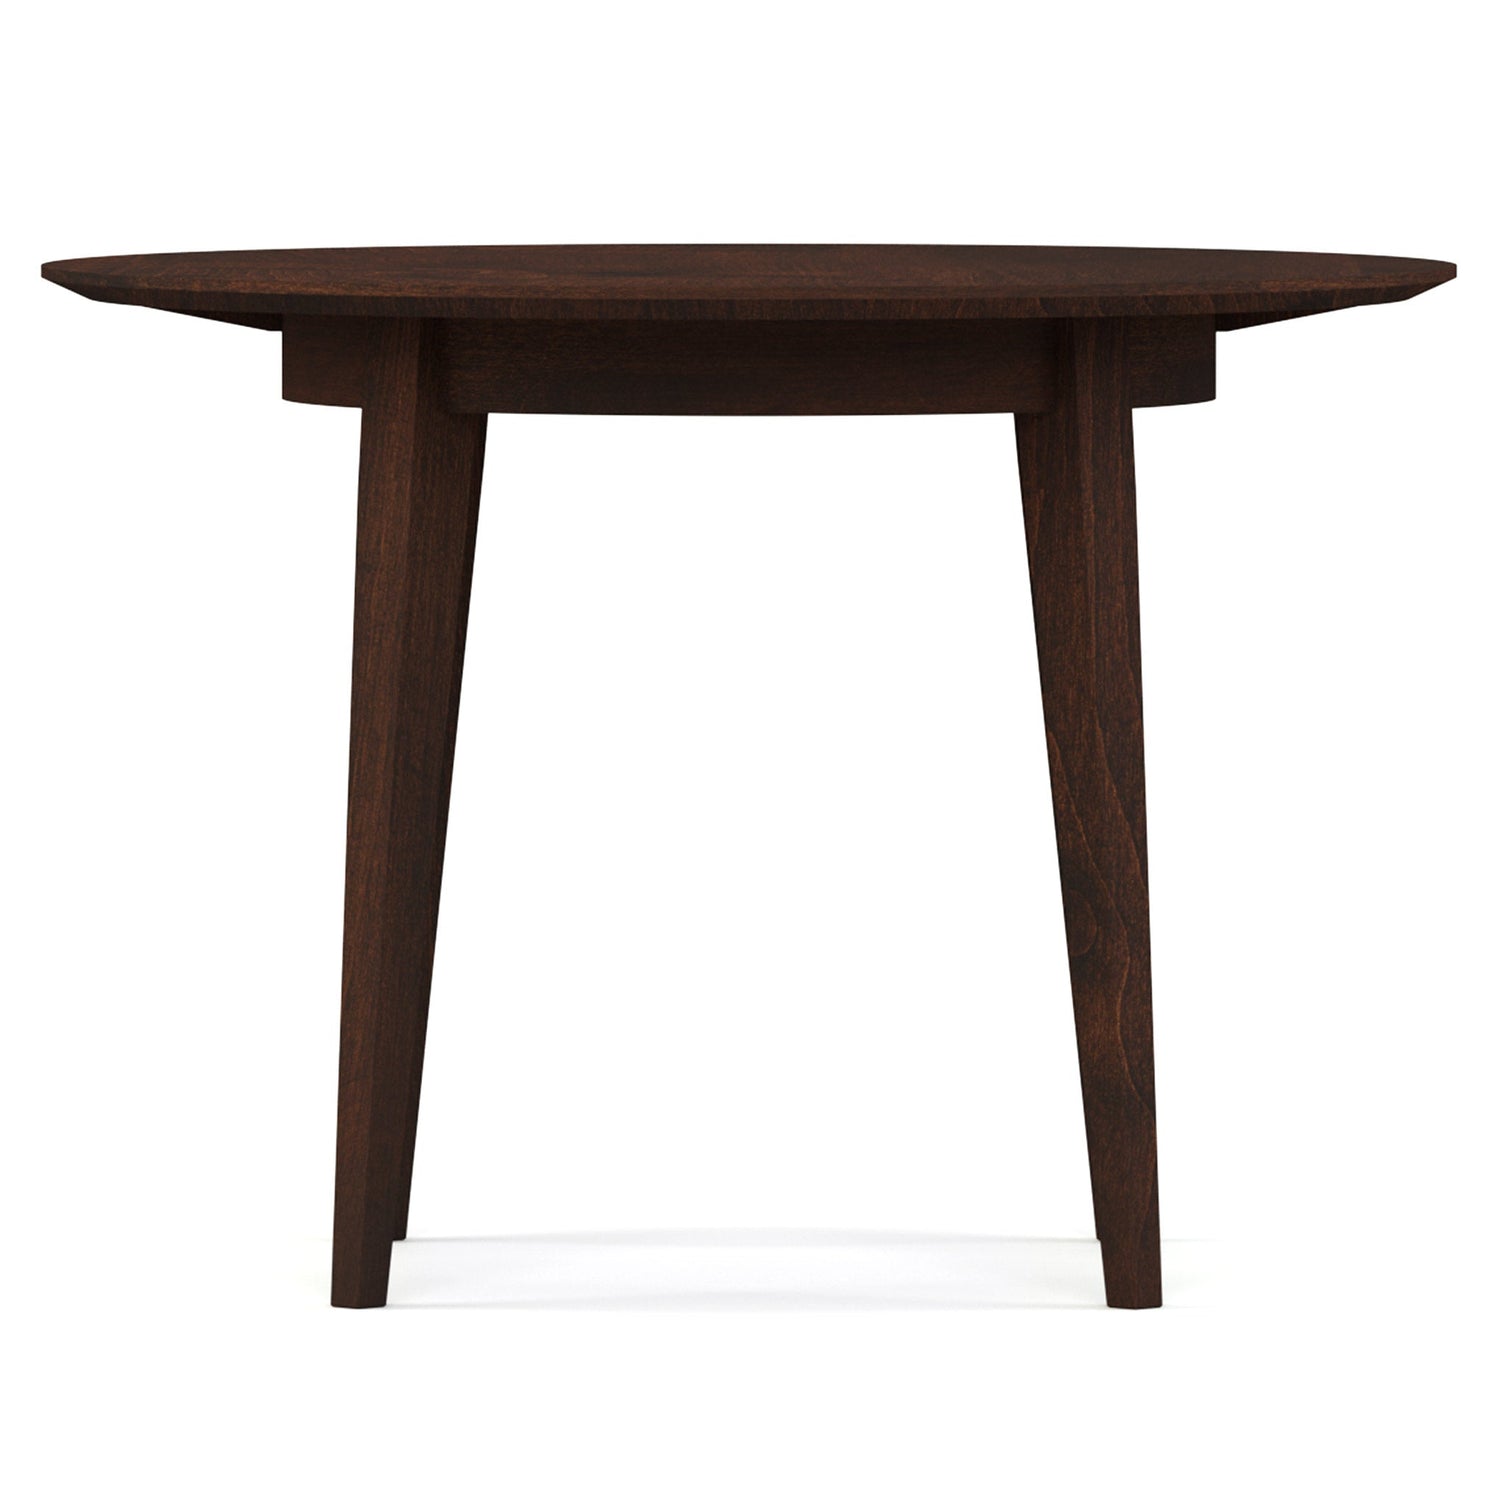 Gable Road 42-inch Round Dining Table